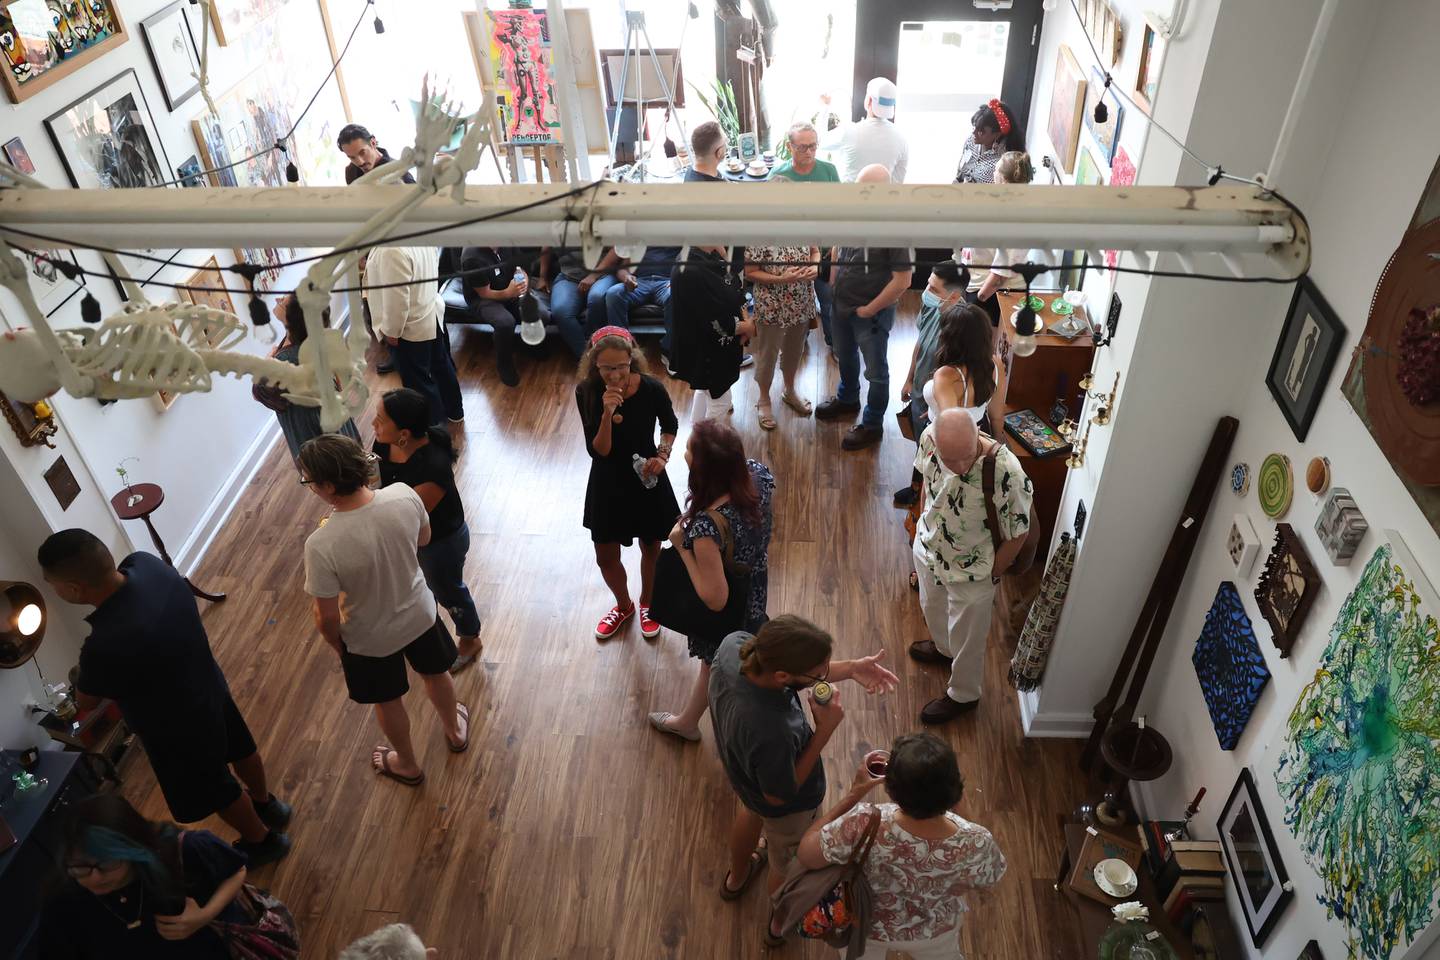 The Strange & Unusual Gallery hosted a pre-party for the The Art Movement Stone and Steel art event in downtown Joliet. Joliet’s arts nonprofit The Art Movement commissioned five sculptures that represent Joliet’s heritage of stone and steel. Thursday, July 28, 2022 in Joliet.